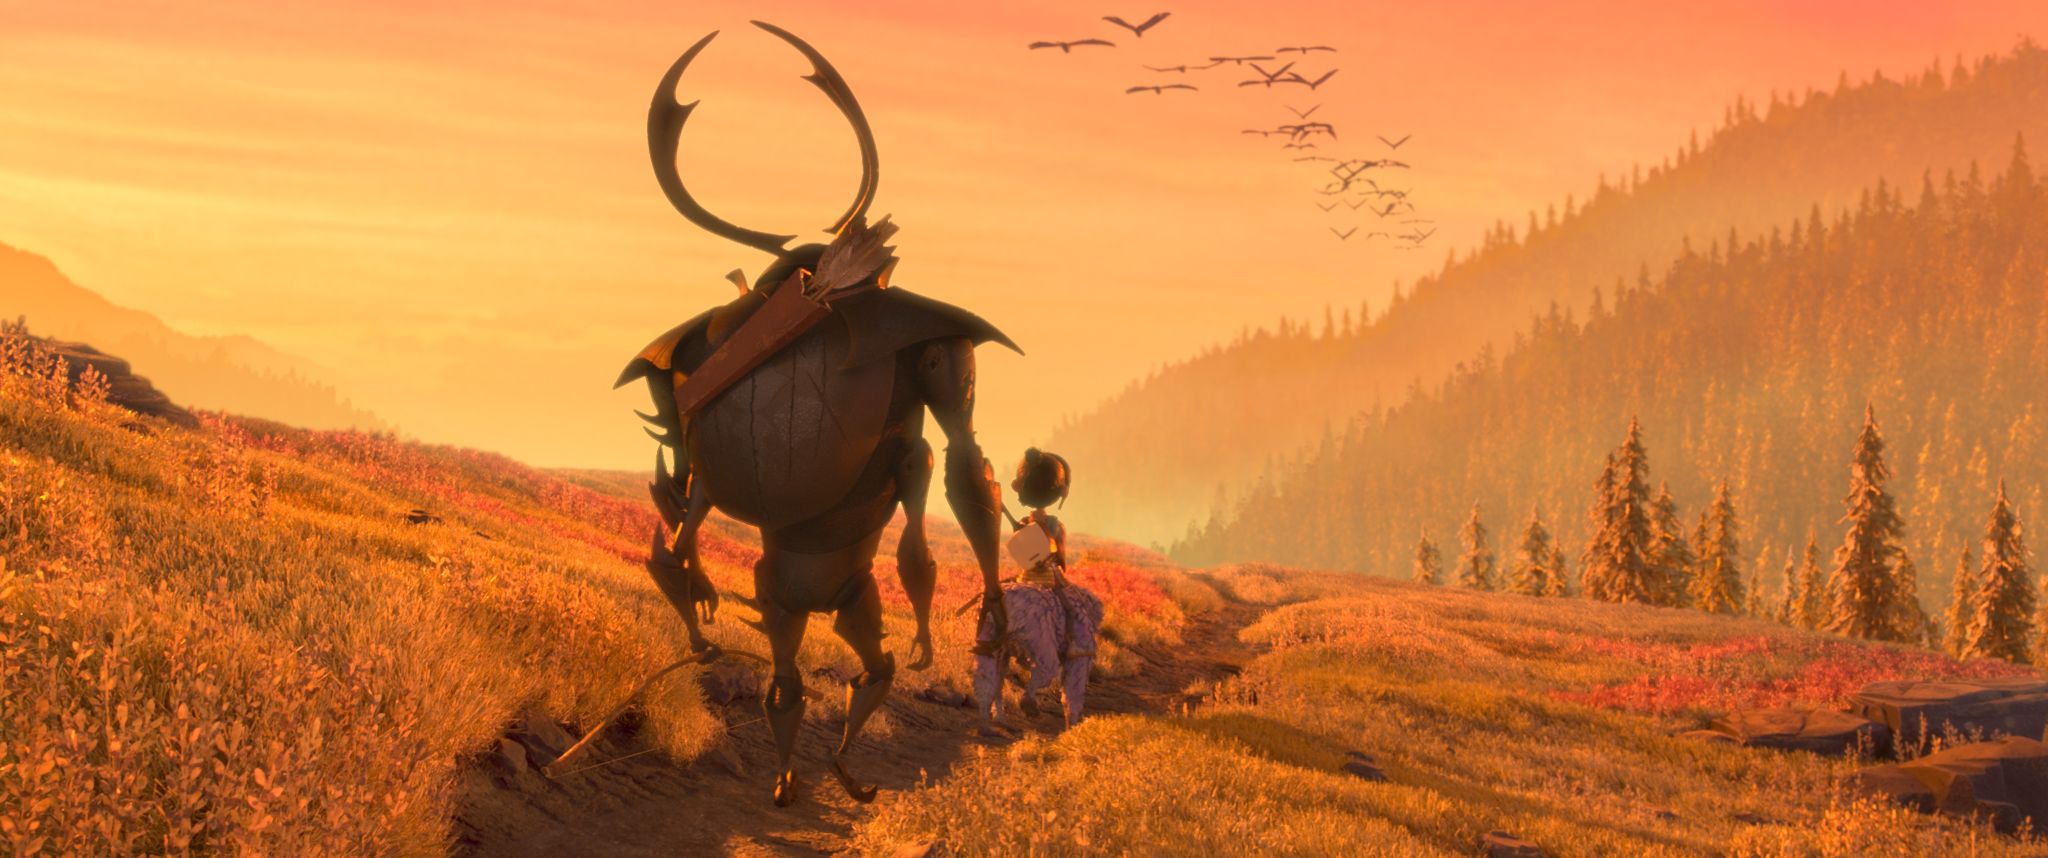 HD Quality Wallpaper | Collection: Movie, 2048x858 Kubo And The Two Strings